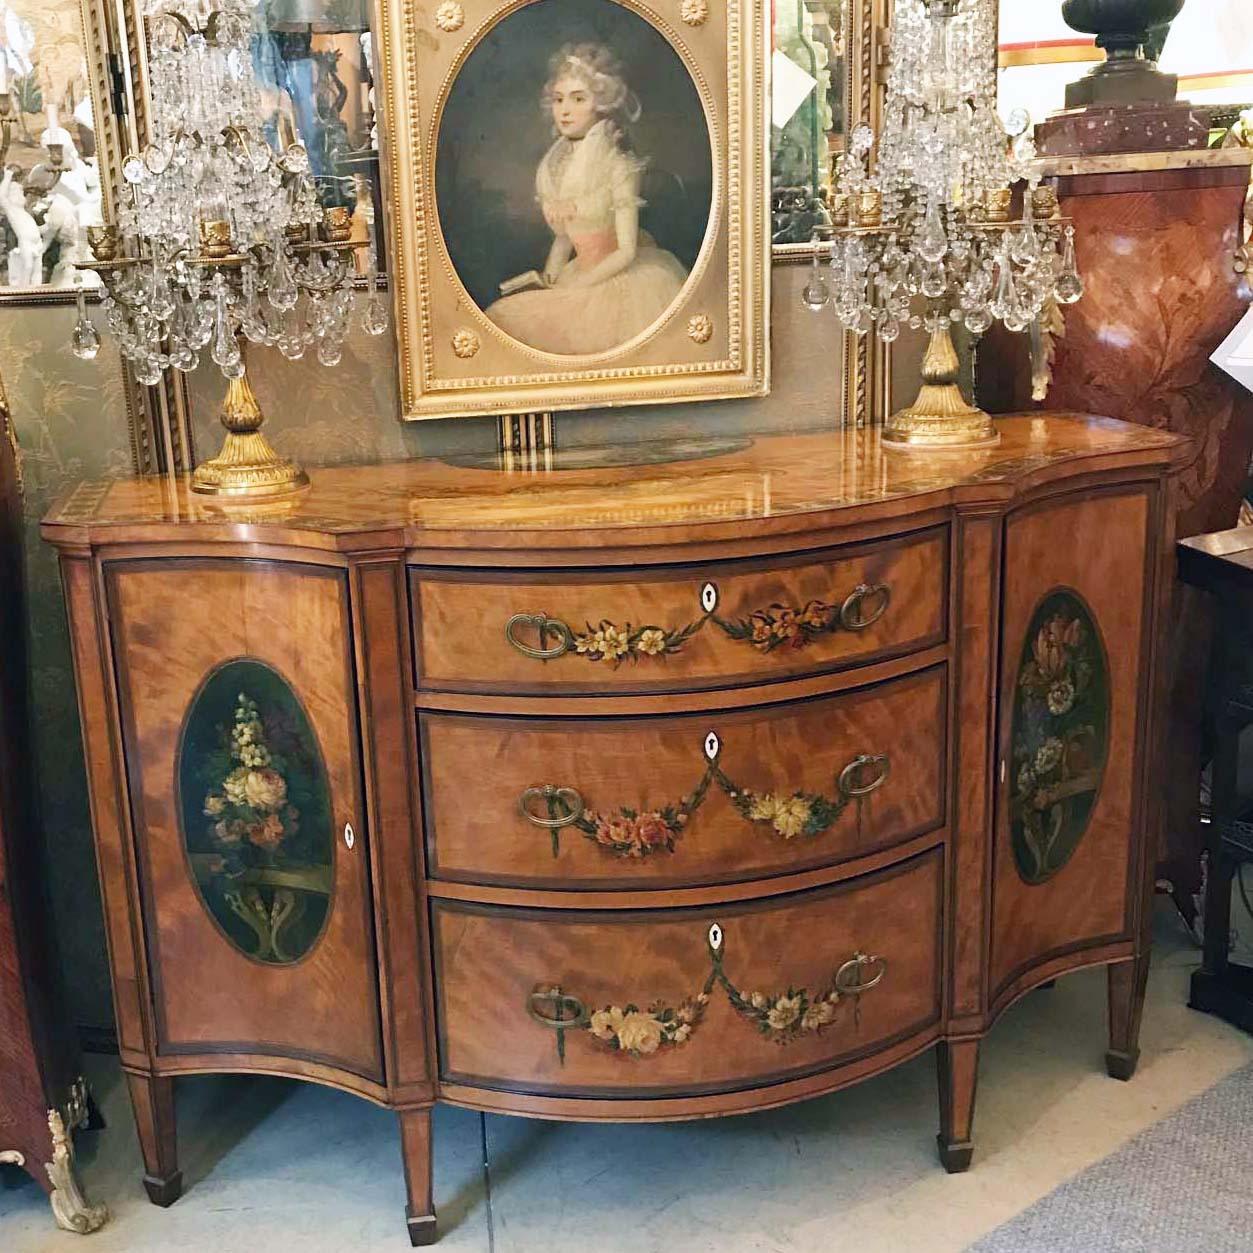 This very fine Sheraton Revival painted satinwood side-cabinet is of breathtaking quality, each drawer and panelled door fits precisely. The central demilune section is enclosed by three graduated drawers and is flanked by gracefully curved panelled